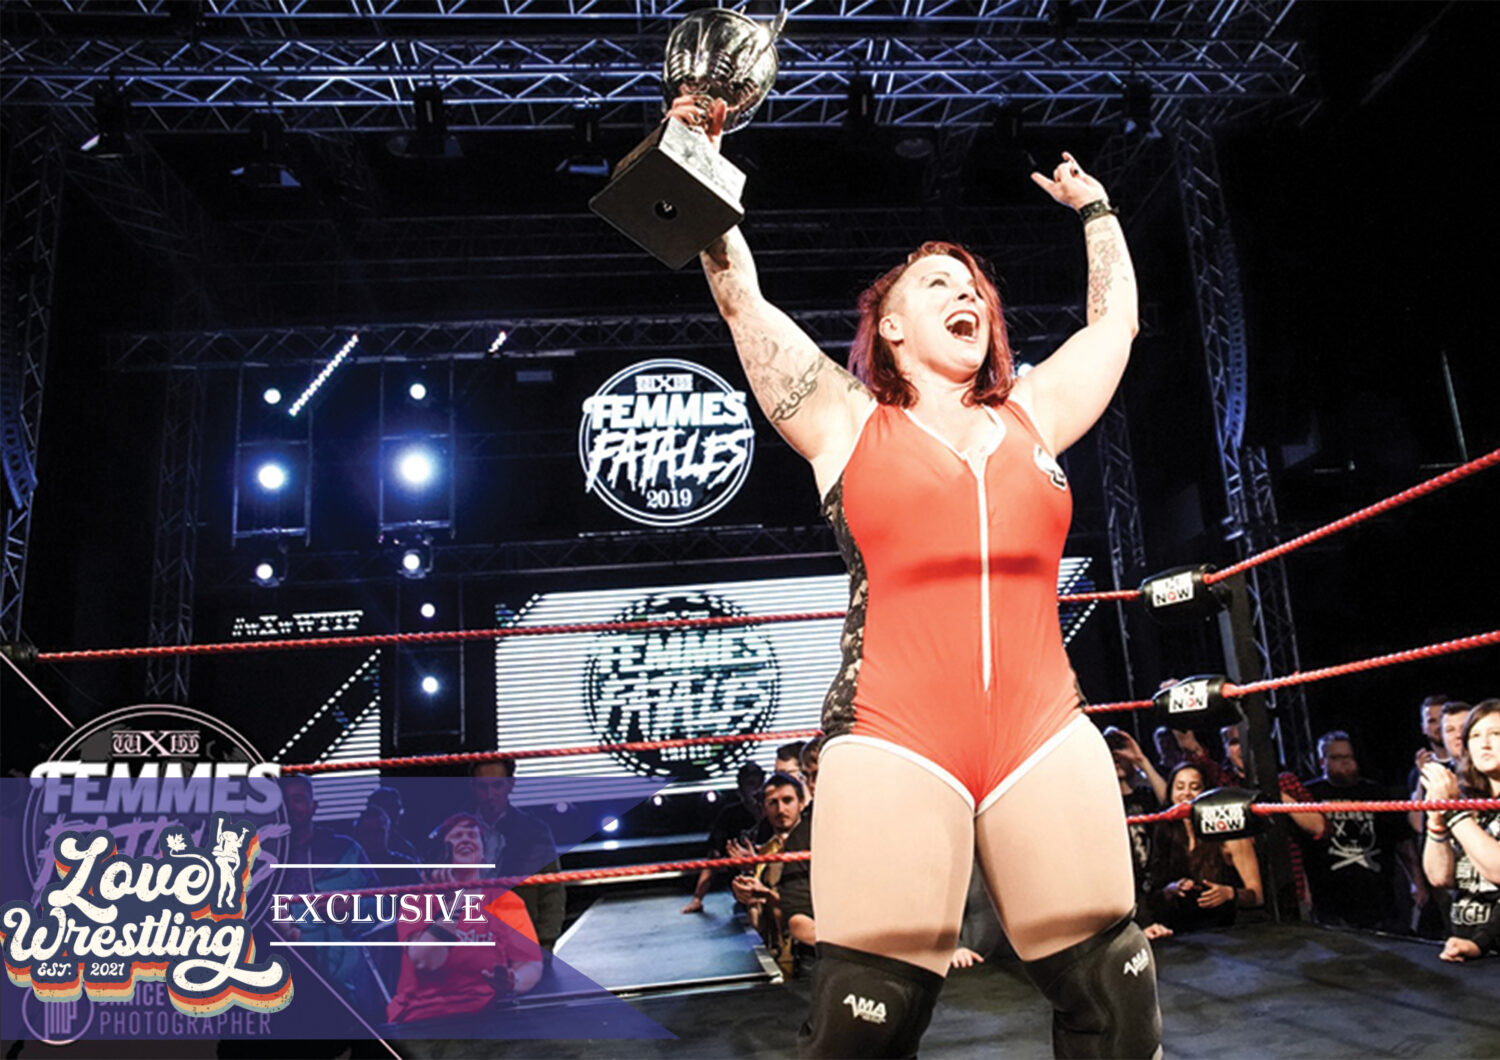 Cross The Line! TNA iMPACT Game Review